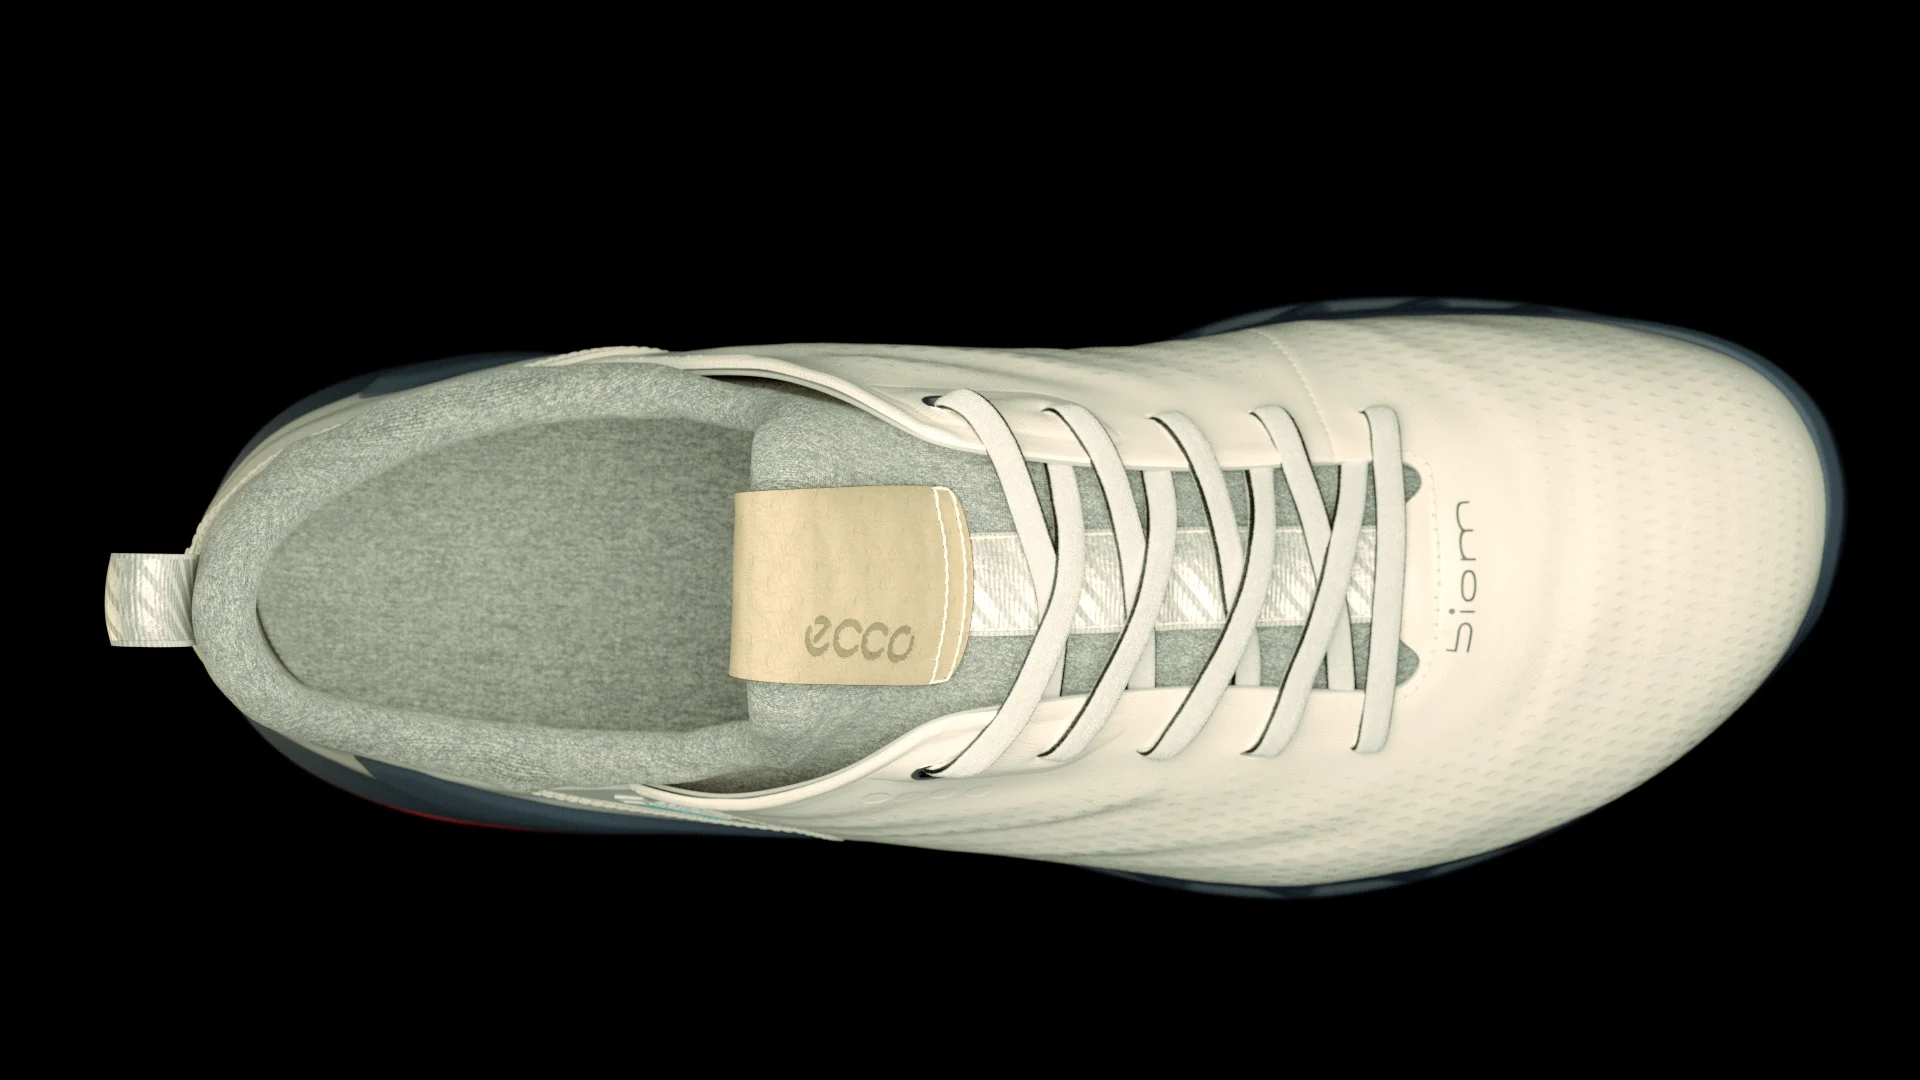 top view of a white Ecco golf shoe in front of a black background